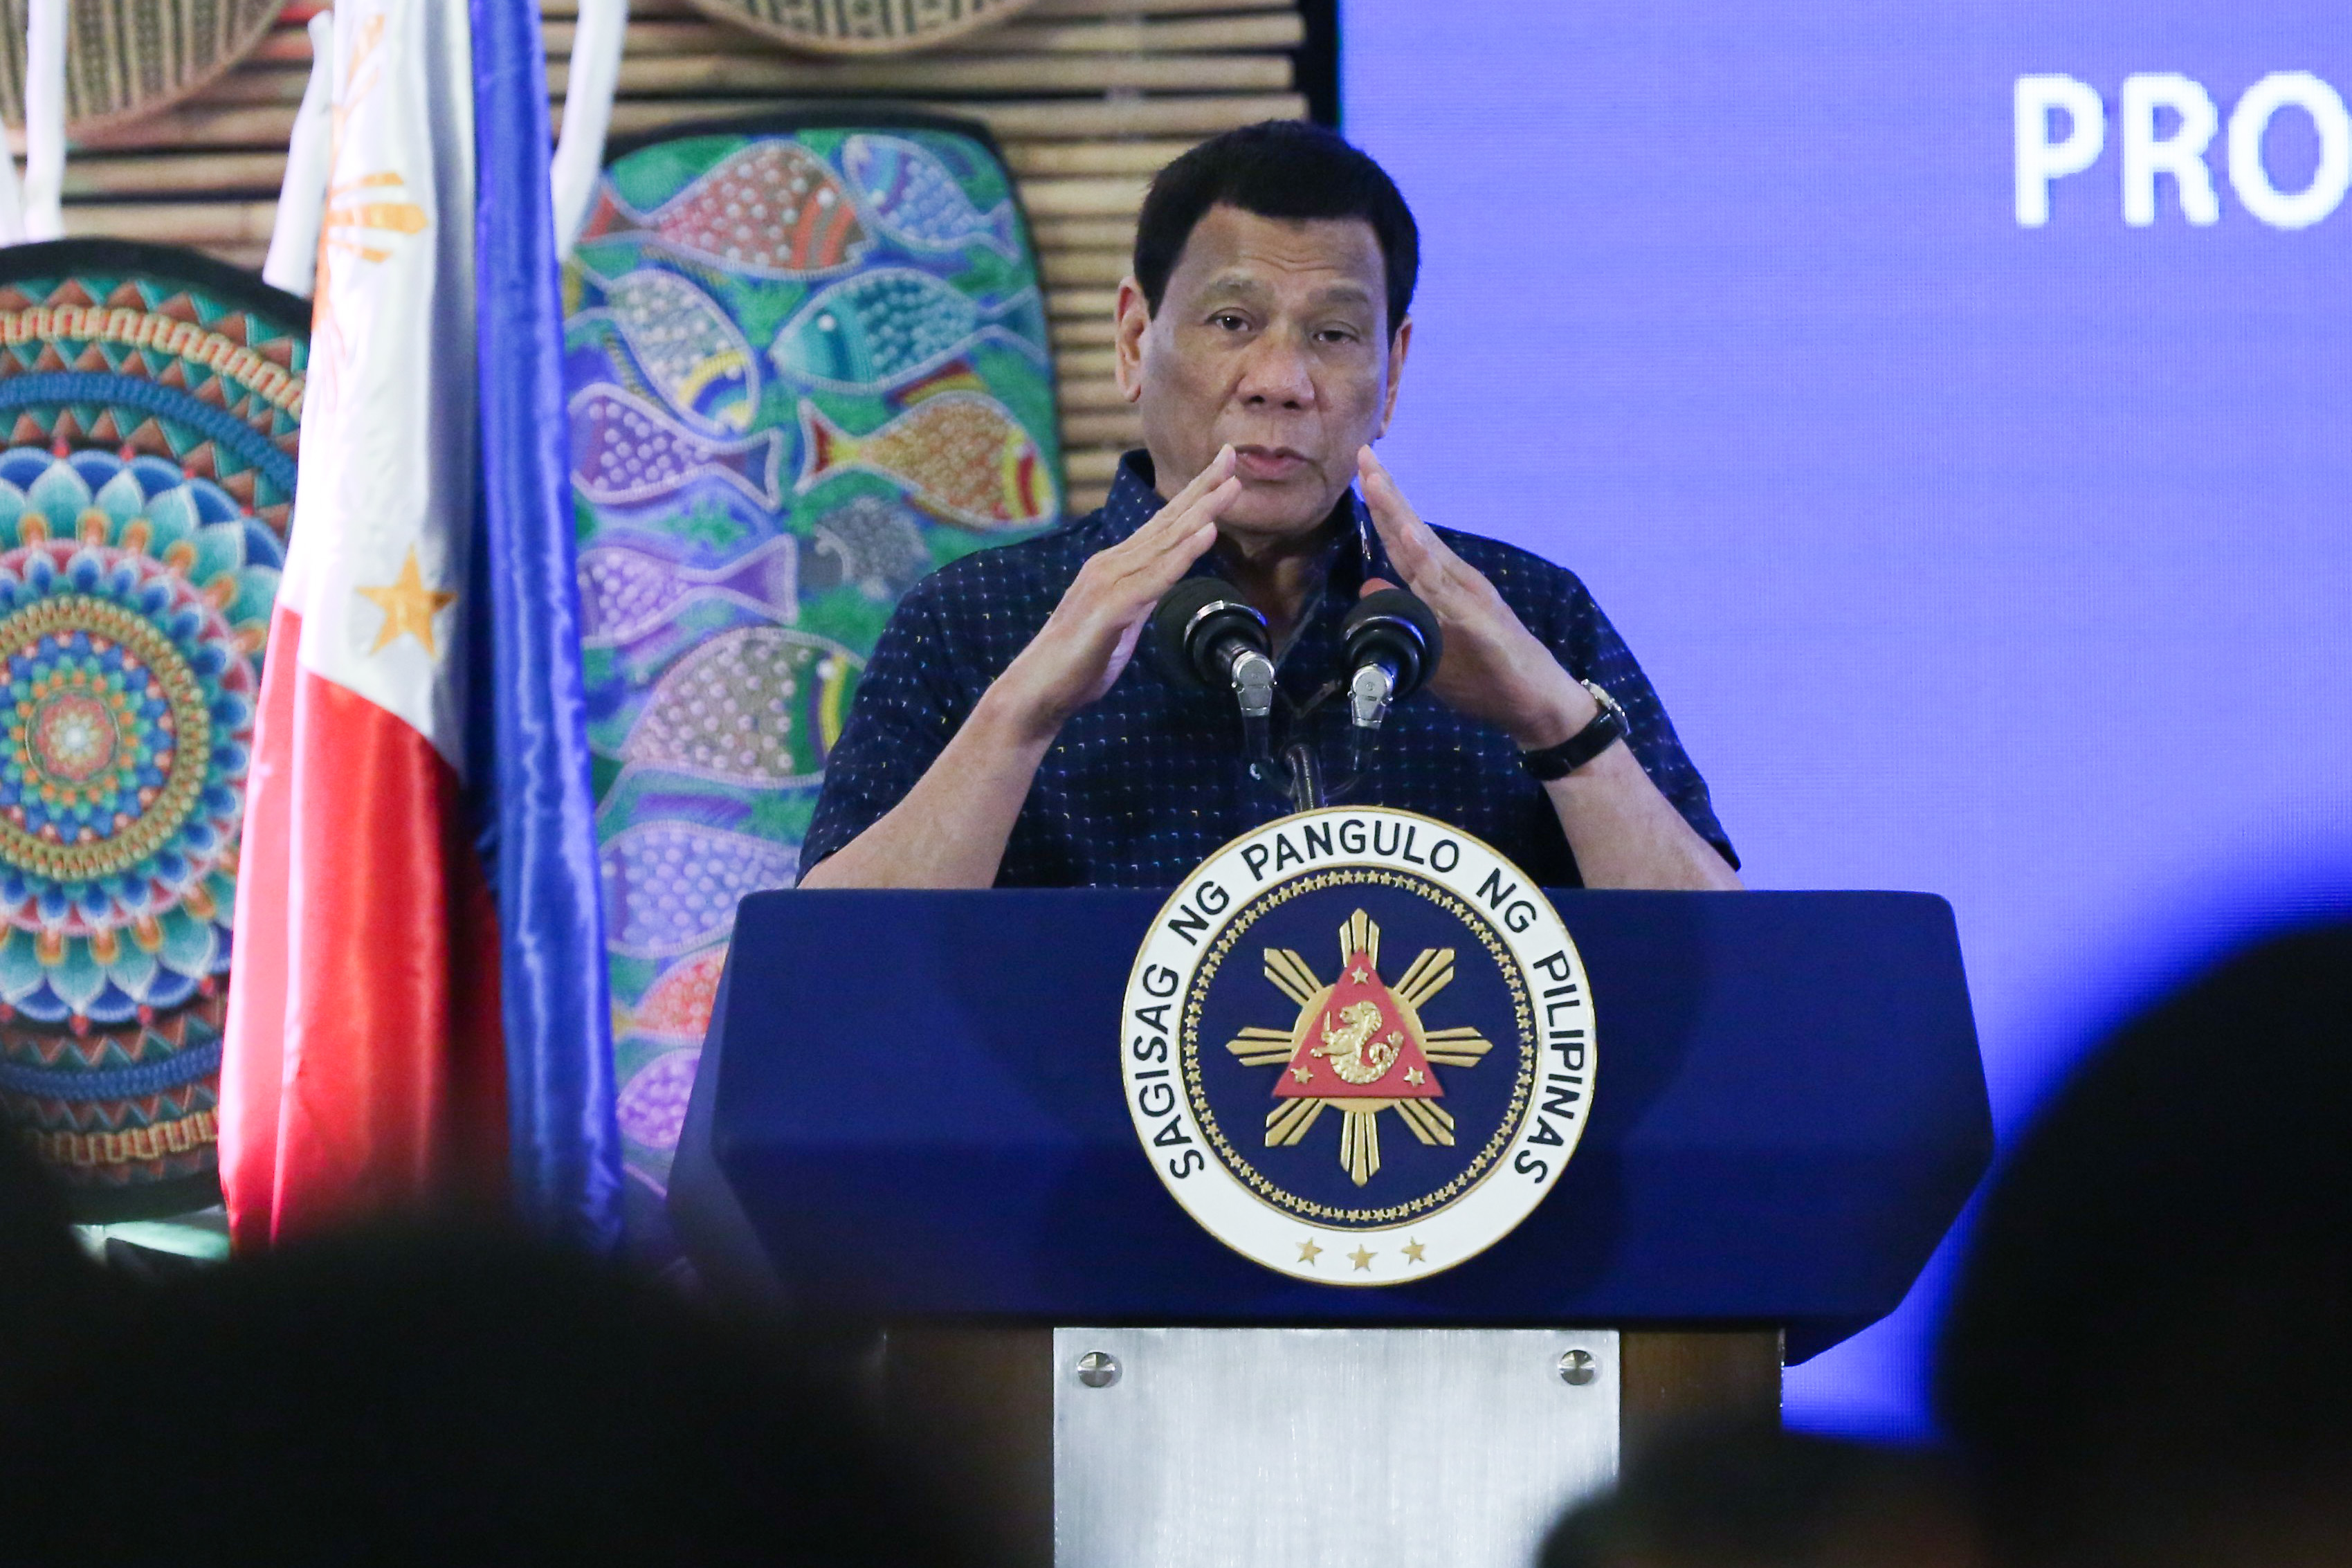 SATISFACTION RATING. President Rodrigo Duterte delivers his speech during the 31st Annual Convention of the Prosecutor's League of the Philippines at the Asturias Hotel in Puerto Princesa City, Palawan on April 4, 2019. File photo by Toto Lozano/Presidential Photo   